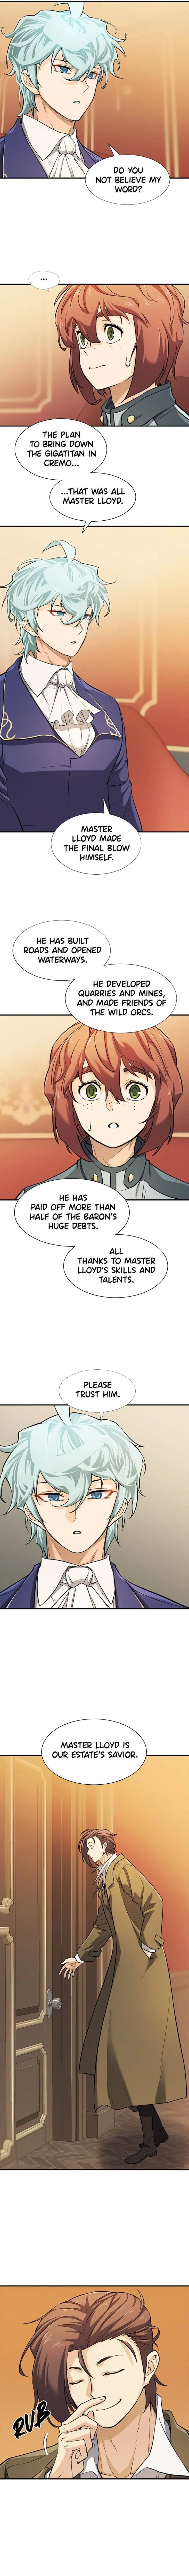 The Greatest Estate Developer Chapter 39 page 11